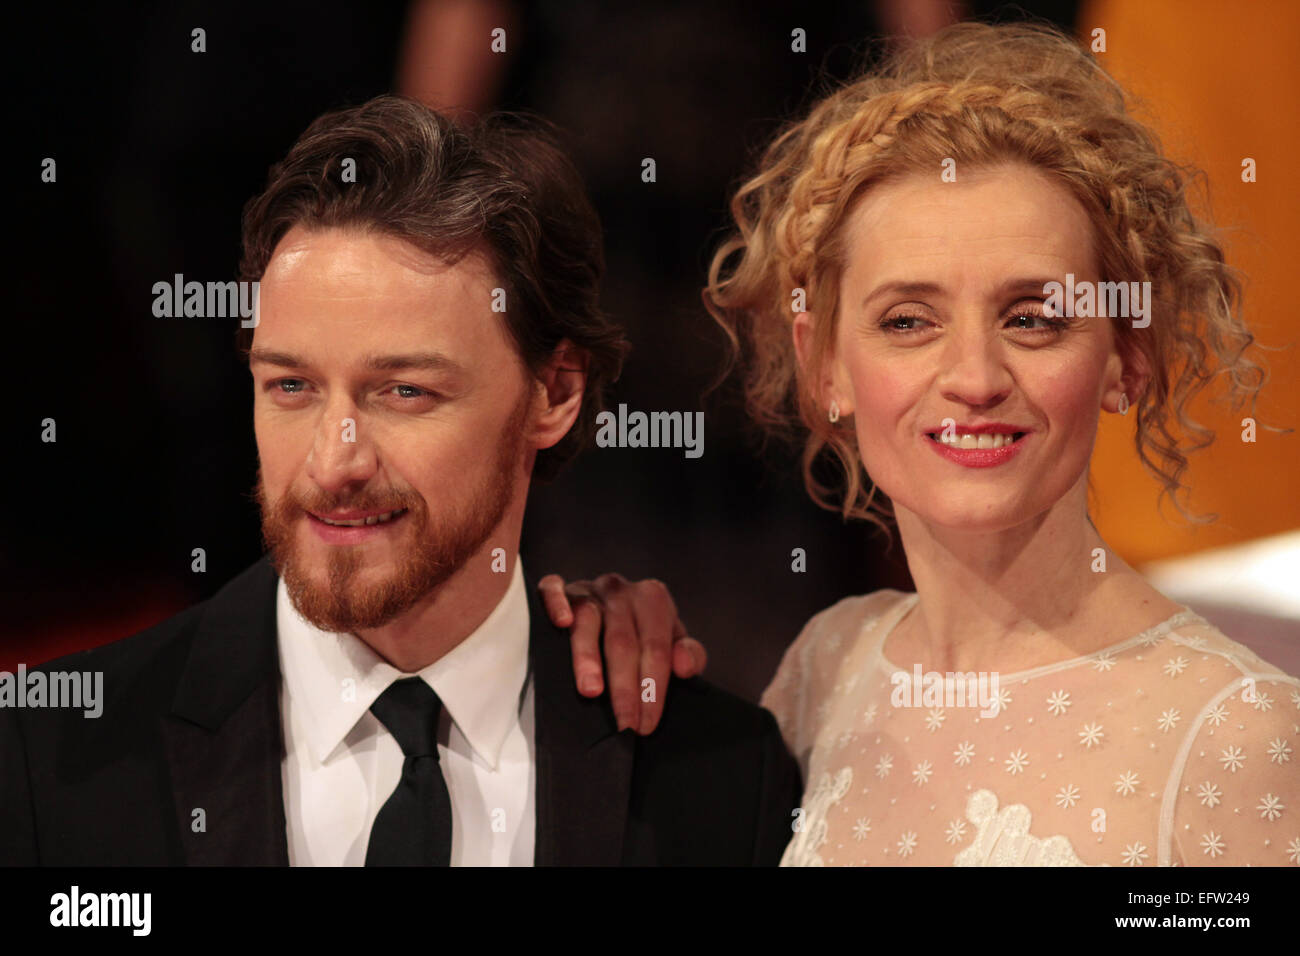 London, UK. 8th February, 2015. James McAvoy and Anne-Marie Duff at the BAFTA 2015 Awards Ceremony, held at the Royal Opera House, Covent Garden, London. Credit:  Paul Marriott/Alamy Live News Stock Photo